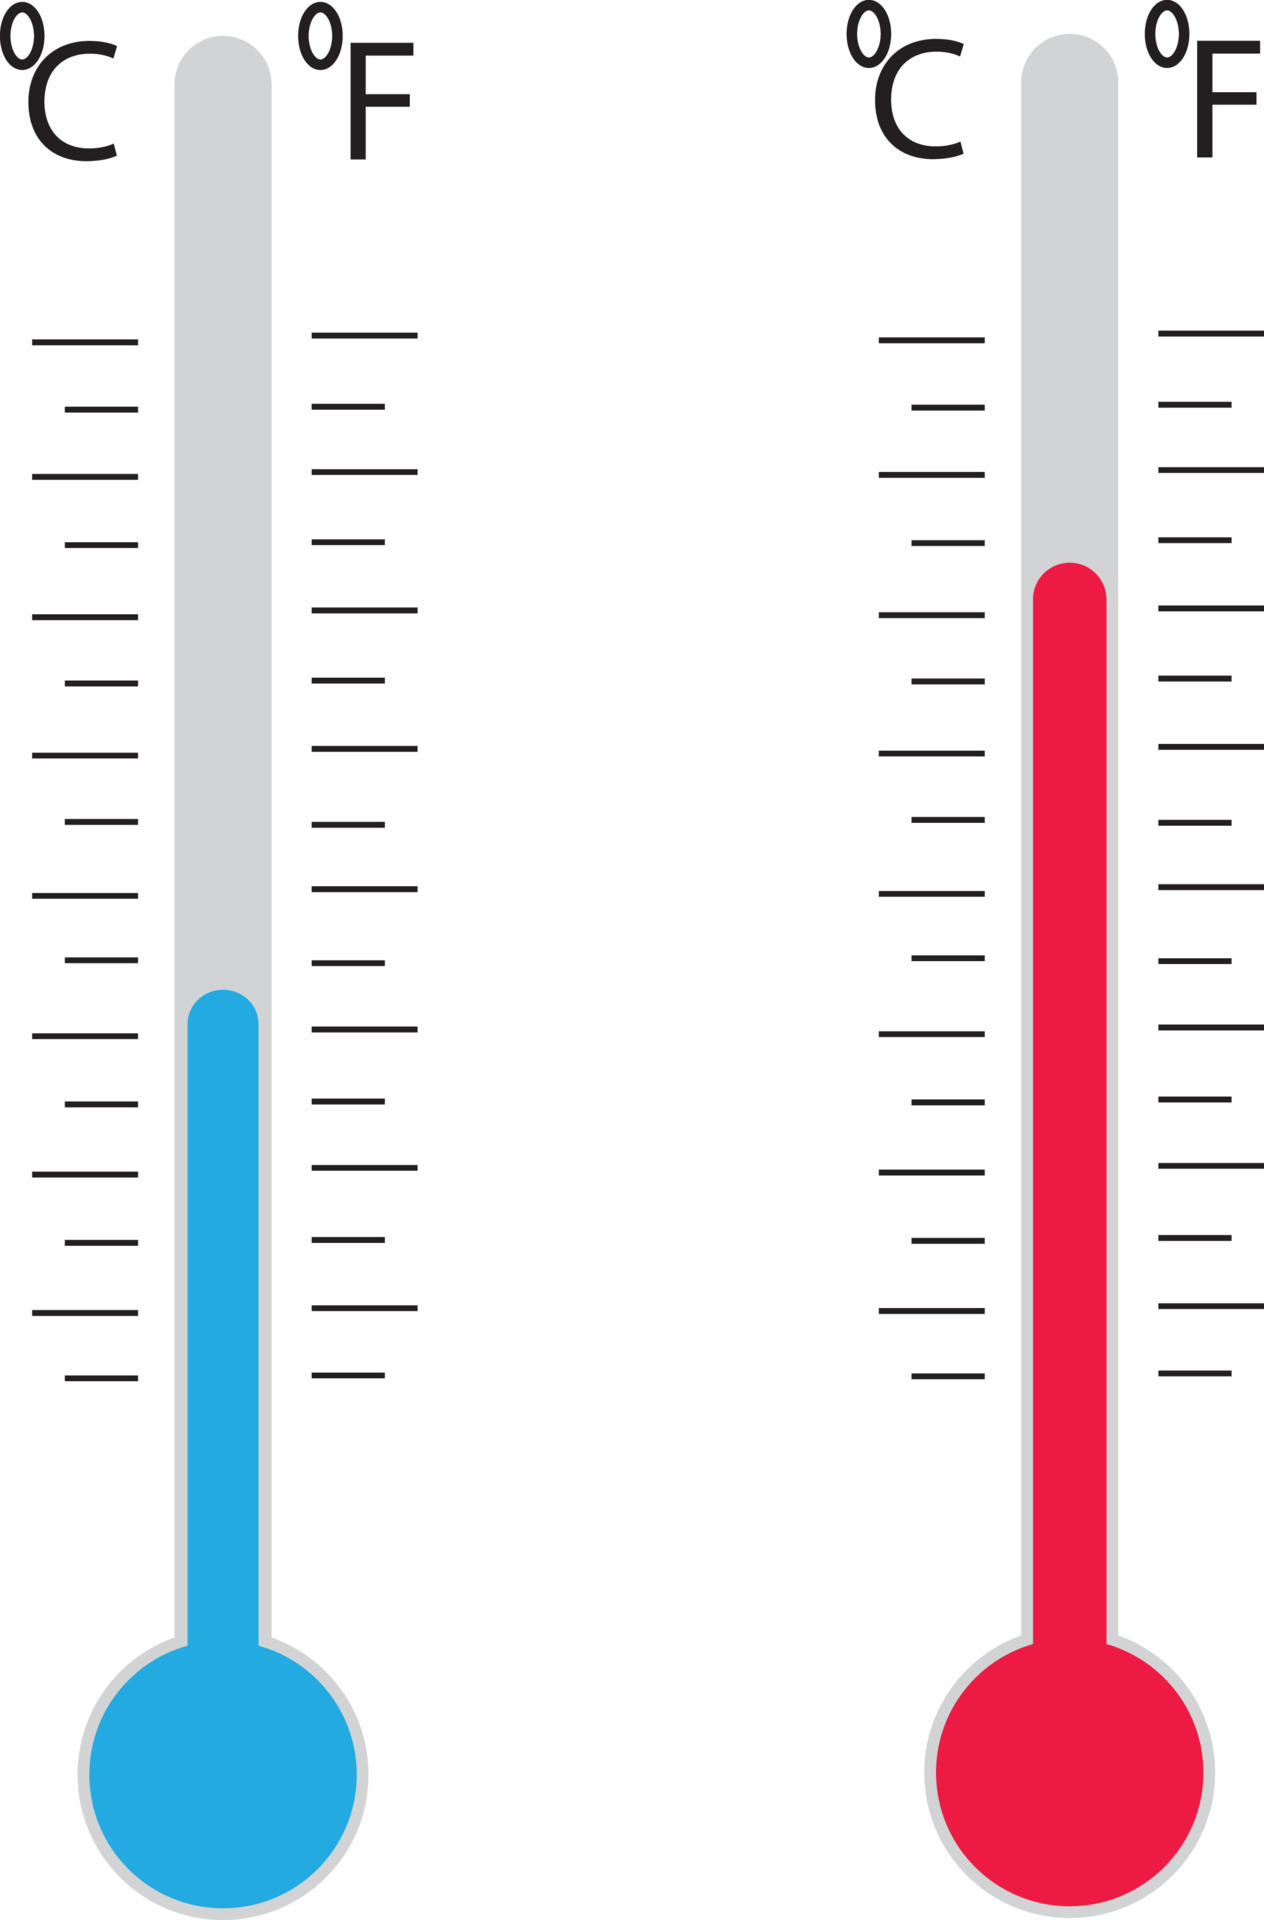 https://static.vecteezy.com/system/resources/previews/005/018/321/original/celsius-and-fahrenheit-thermometers-thermometer-equipment-showing-hot-or-cold-weather-vector.jpg